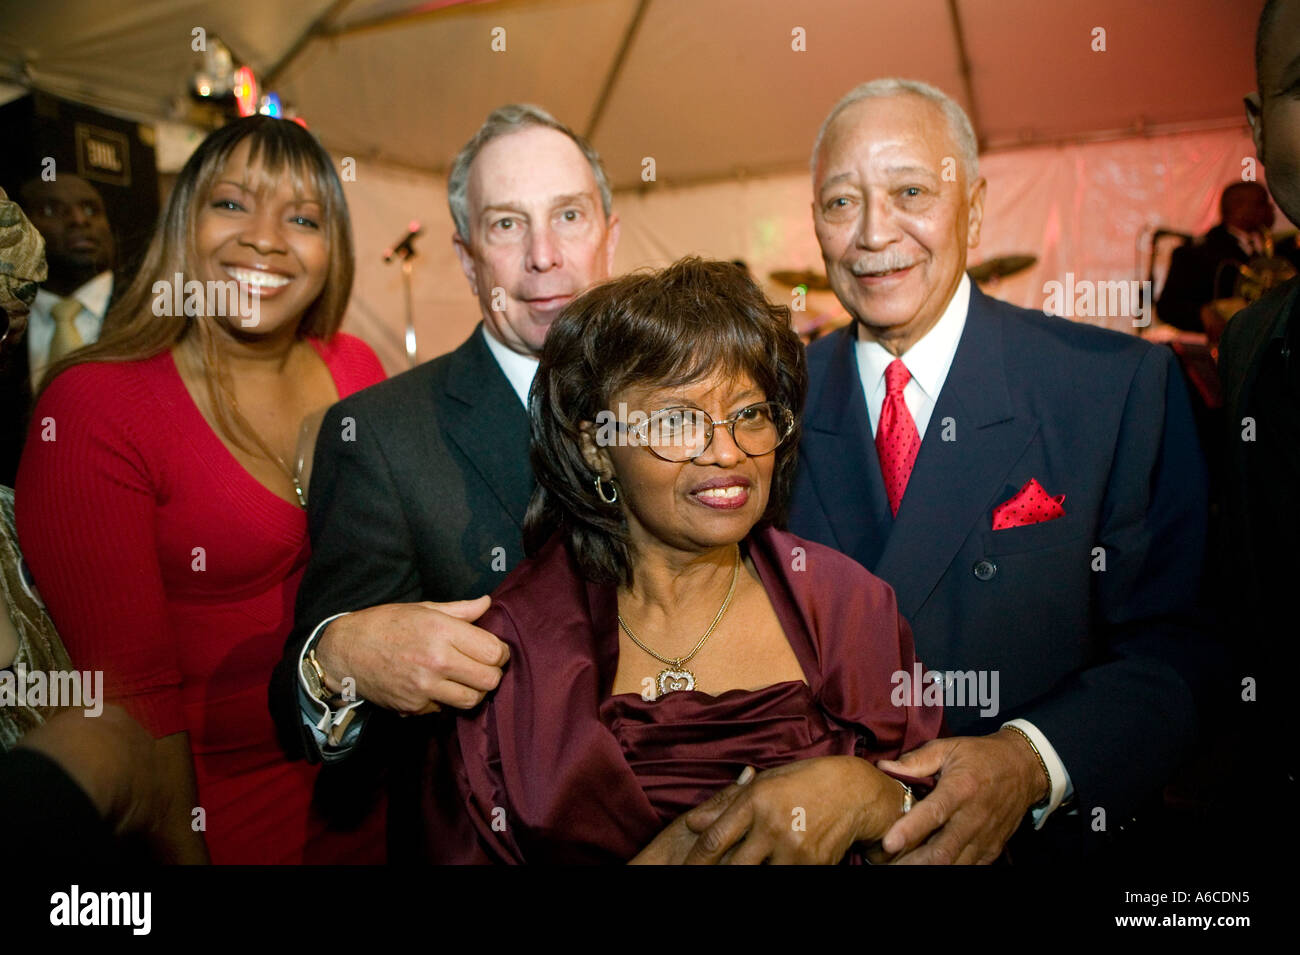 Sylvia s Restaurant owner Sylvia Woods (C) with Michael Bloomberg & David Dinkins at her 80th birthday party New York City Feb 2006 Stock Photo